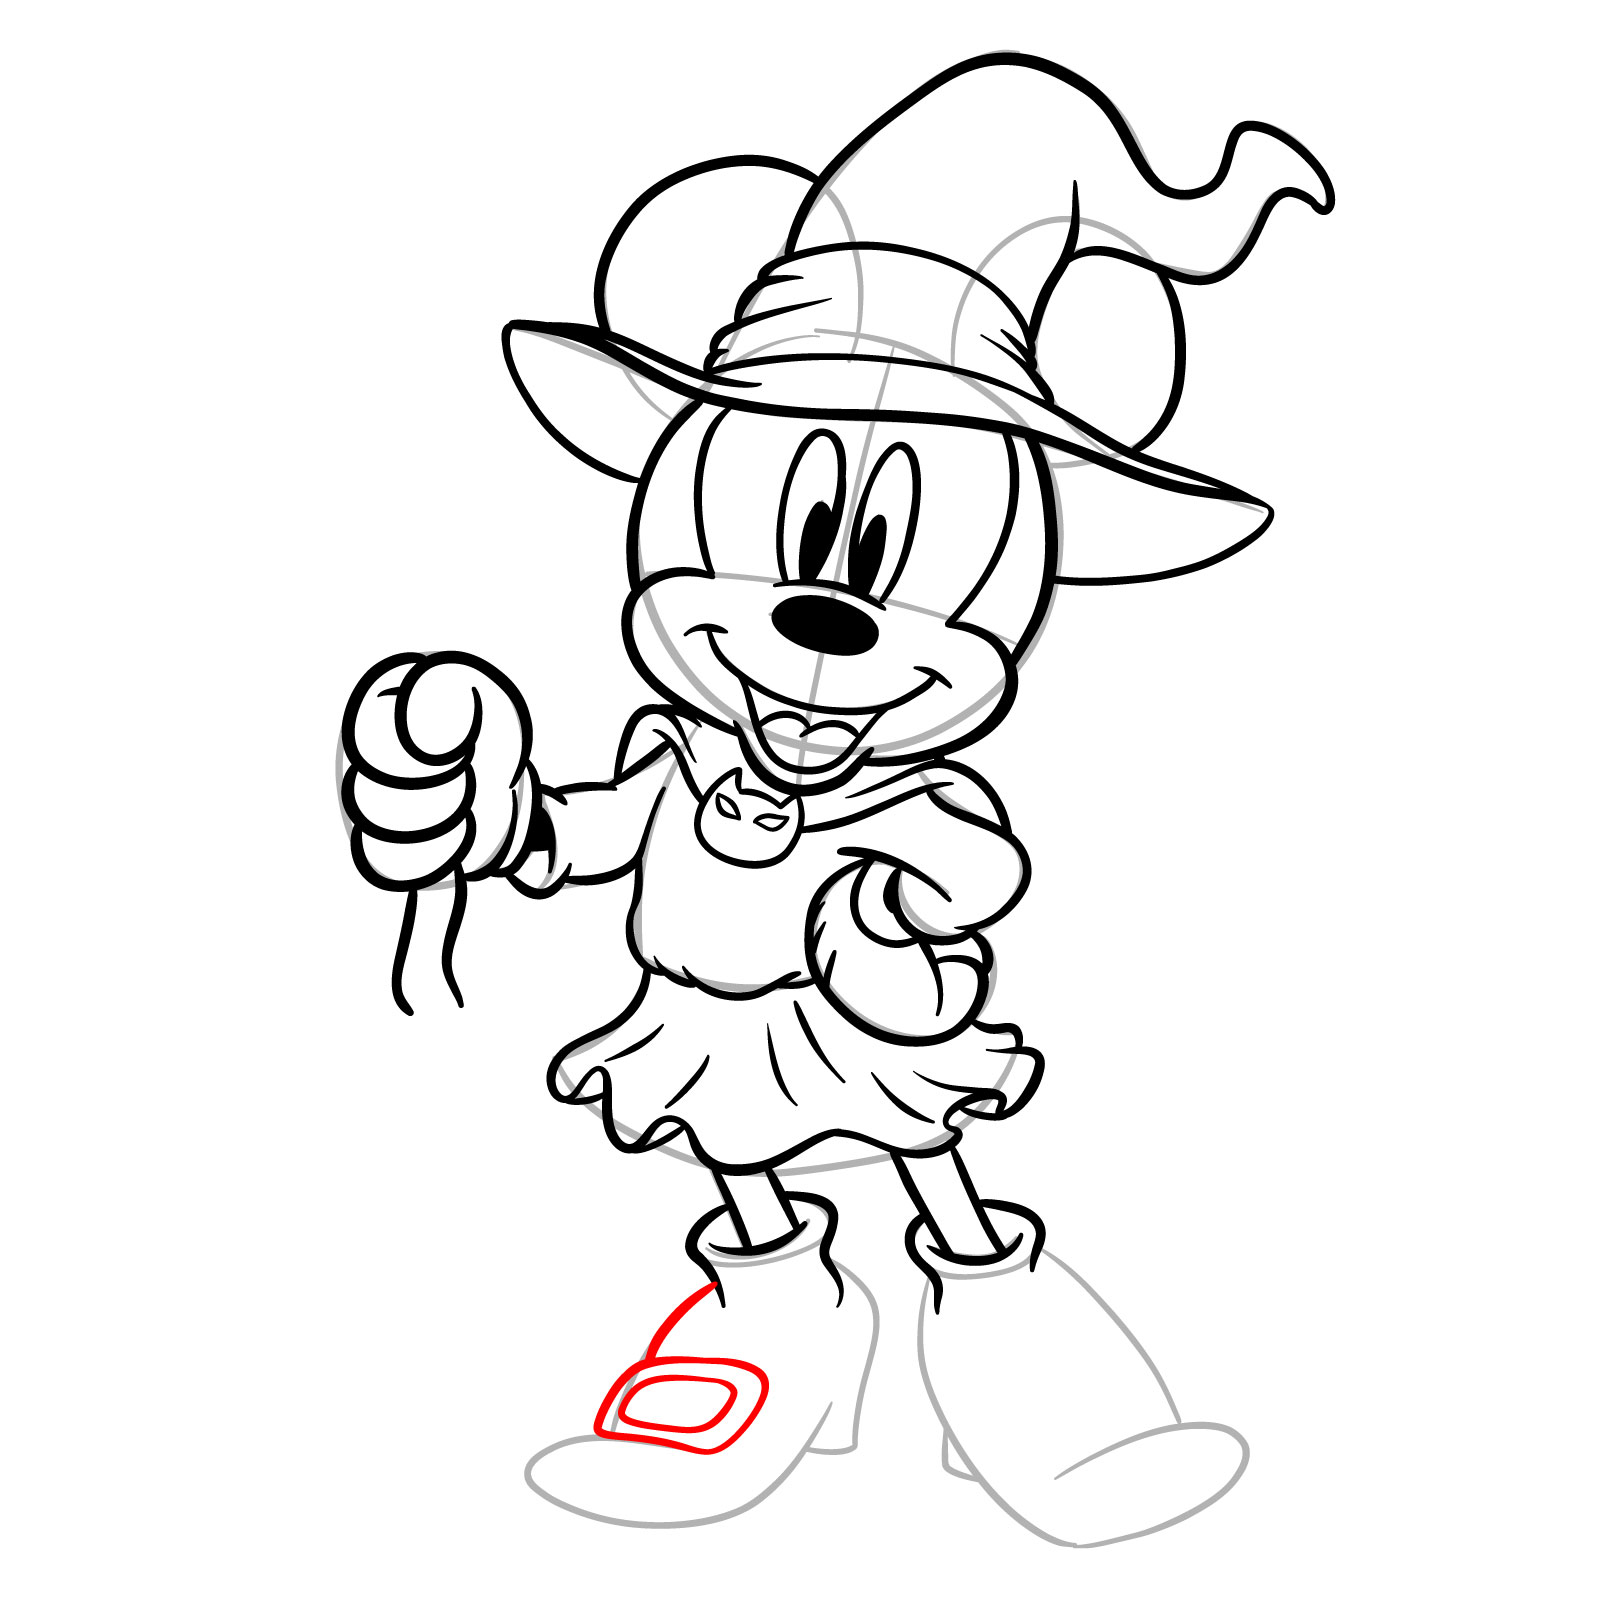 How to draw Halloween Minnie Mouse as a witch - step 27